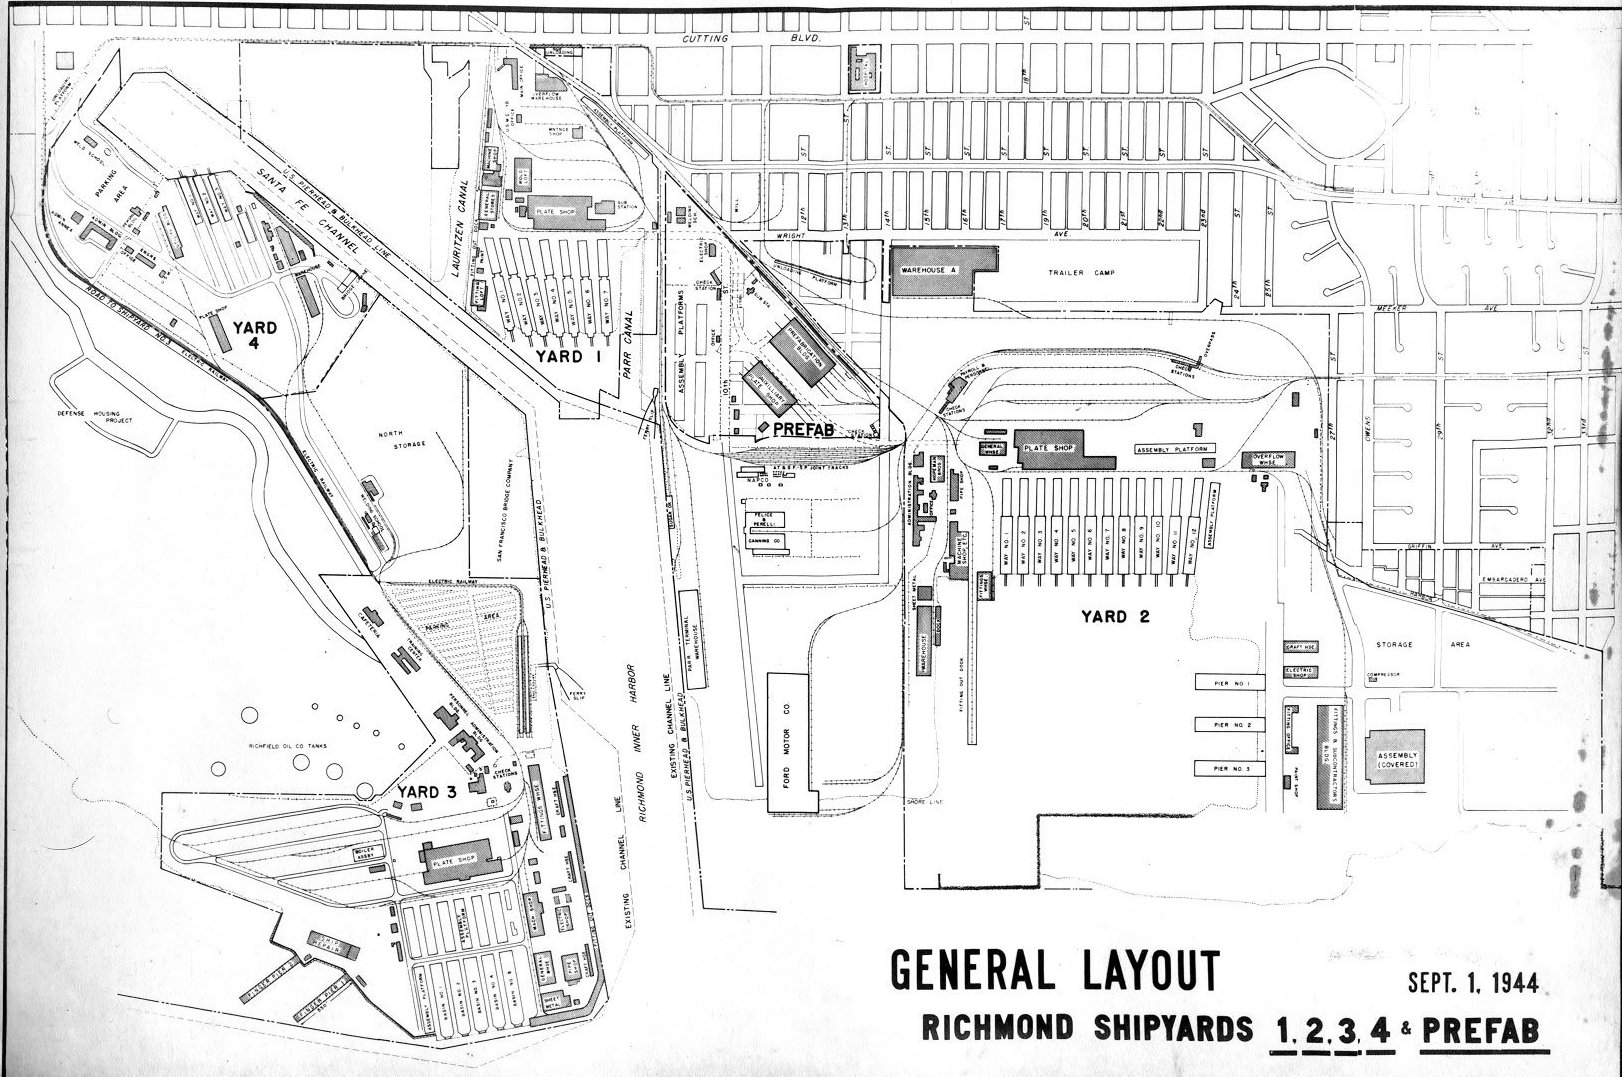 Sep 1944 map showing the general layout of Kaiser Richmond Shipyards Nos. 1, 2, 3, and 4 plus the prefabrication shops, Richmond, California, United States.